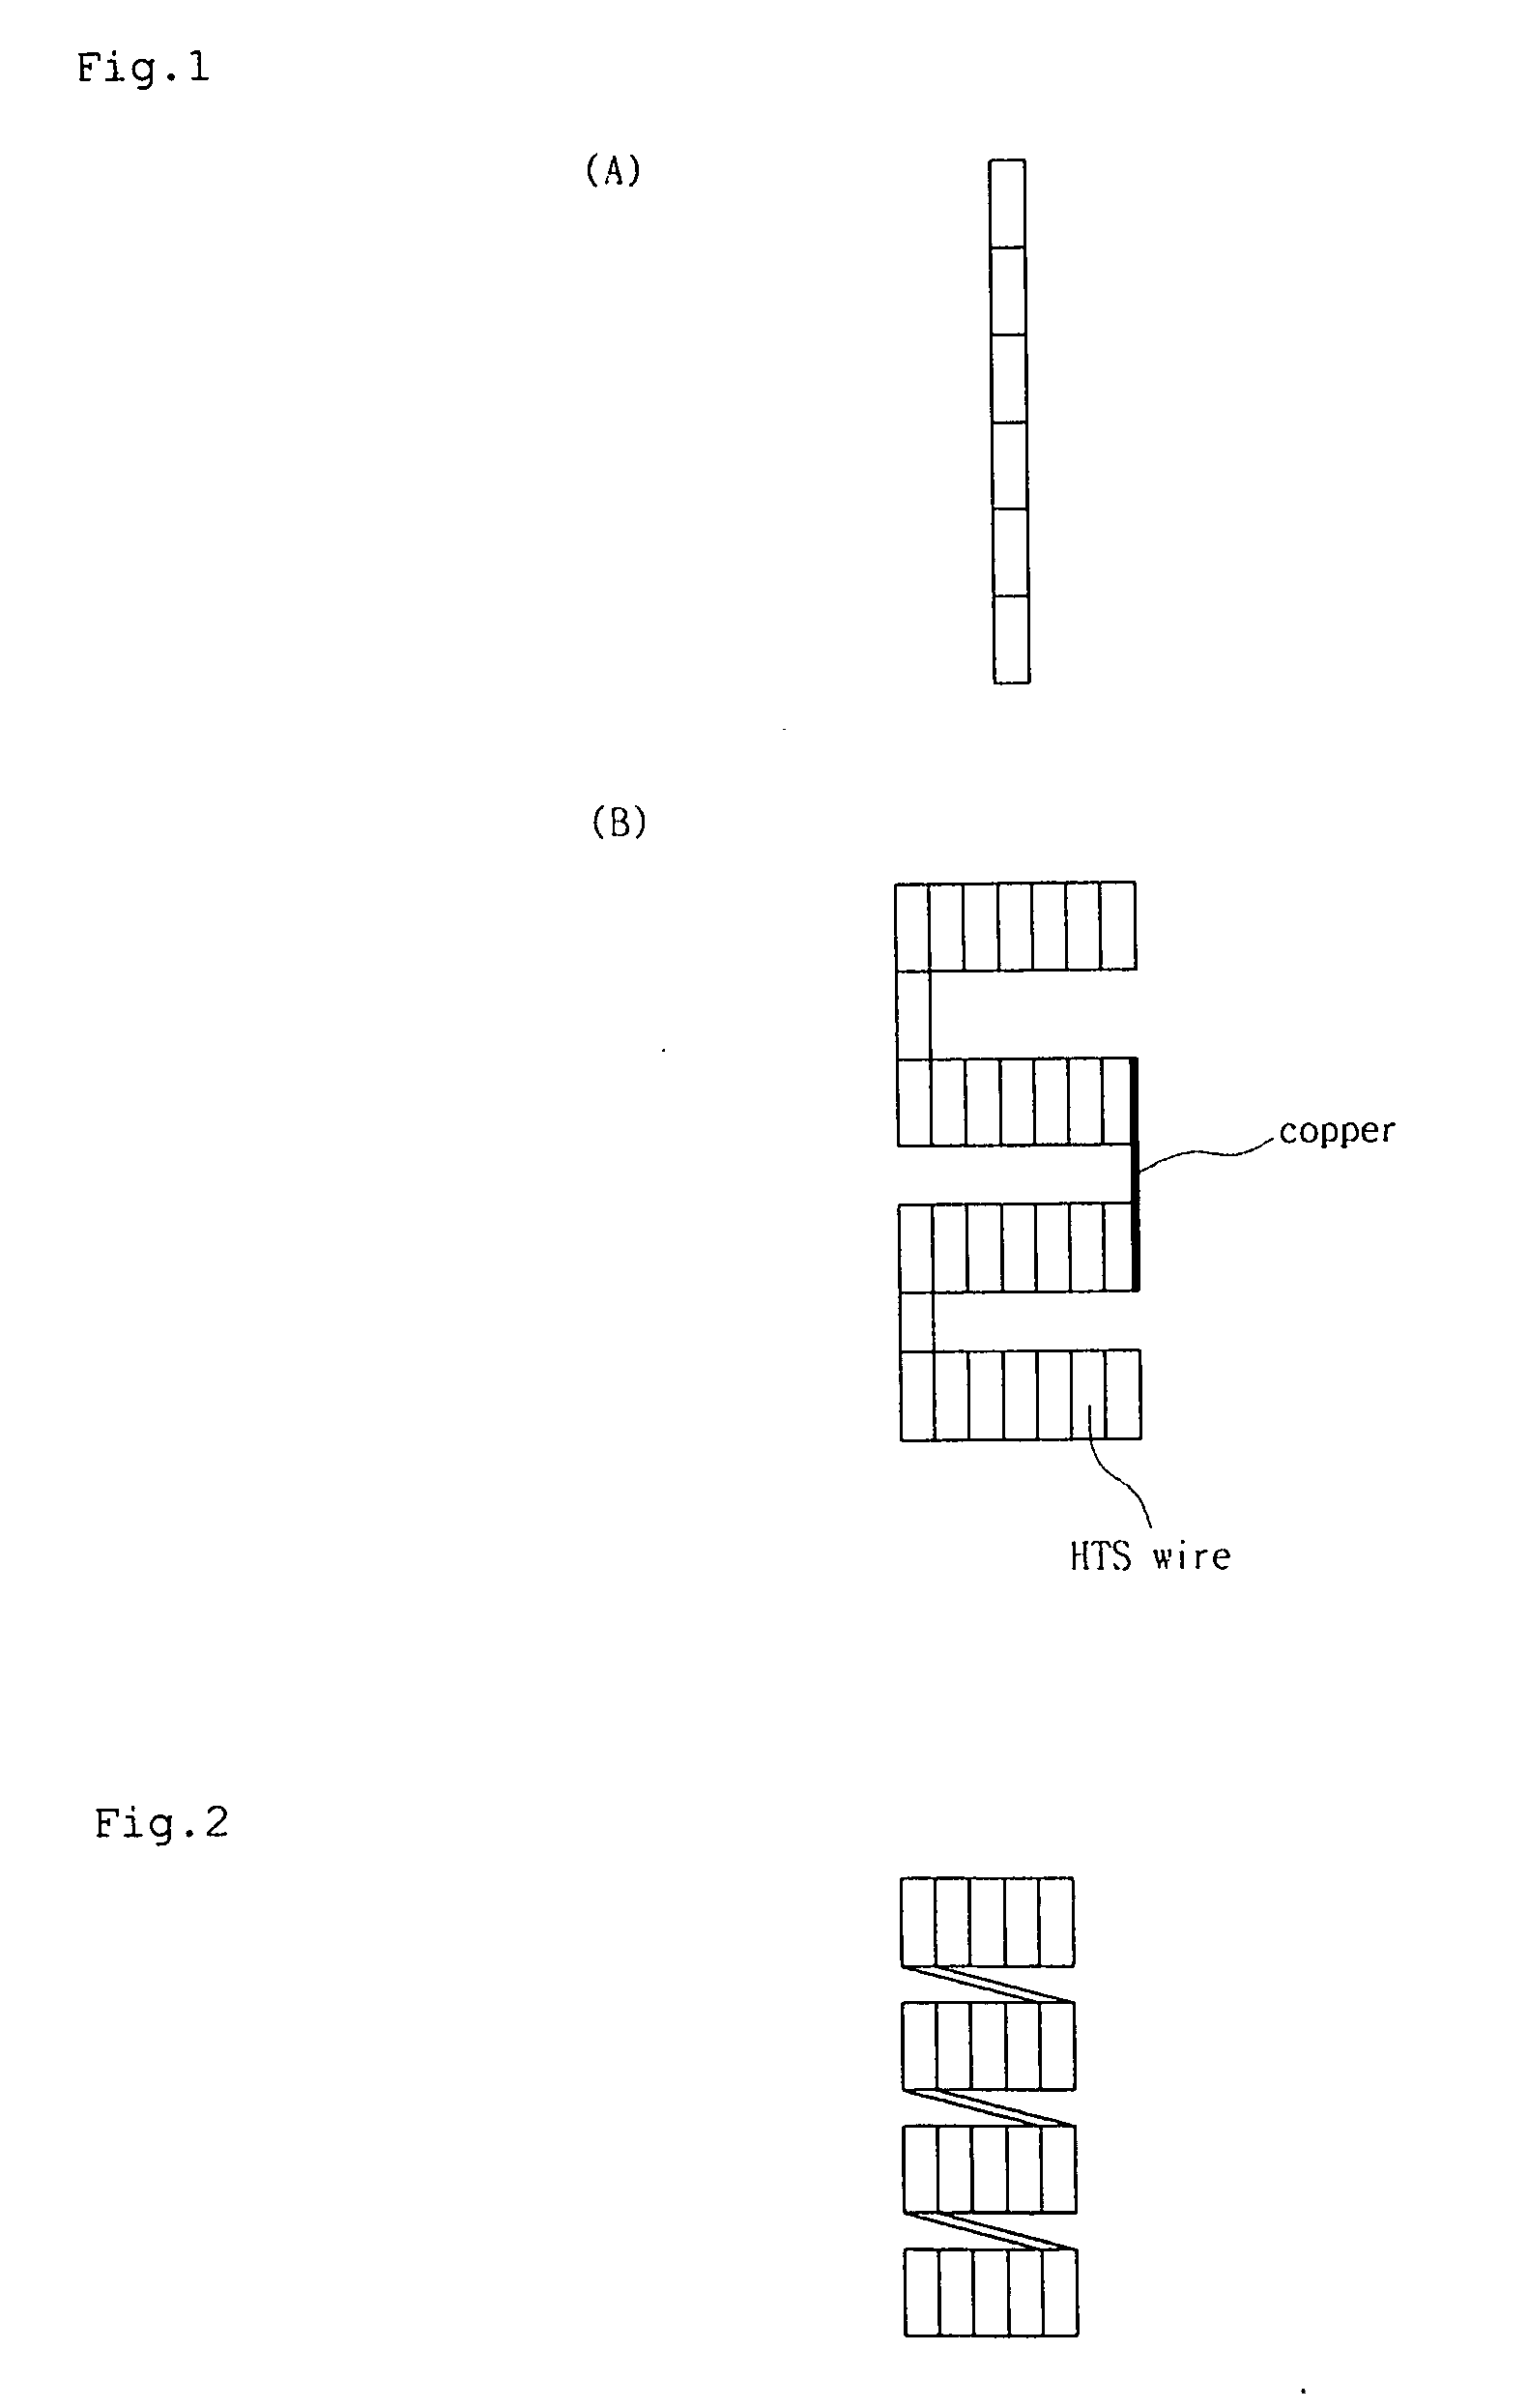 Method of manufacturing continuous disk winding for high-voltage superconducting transformers